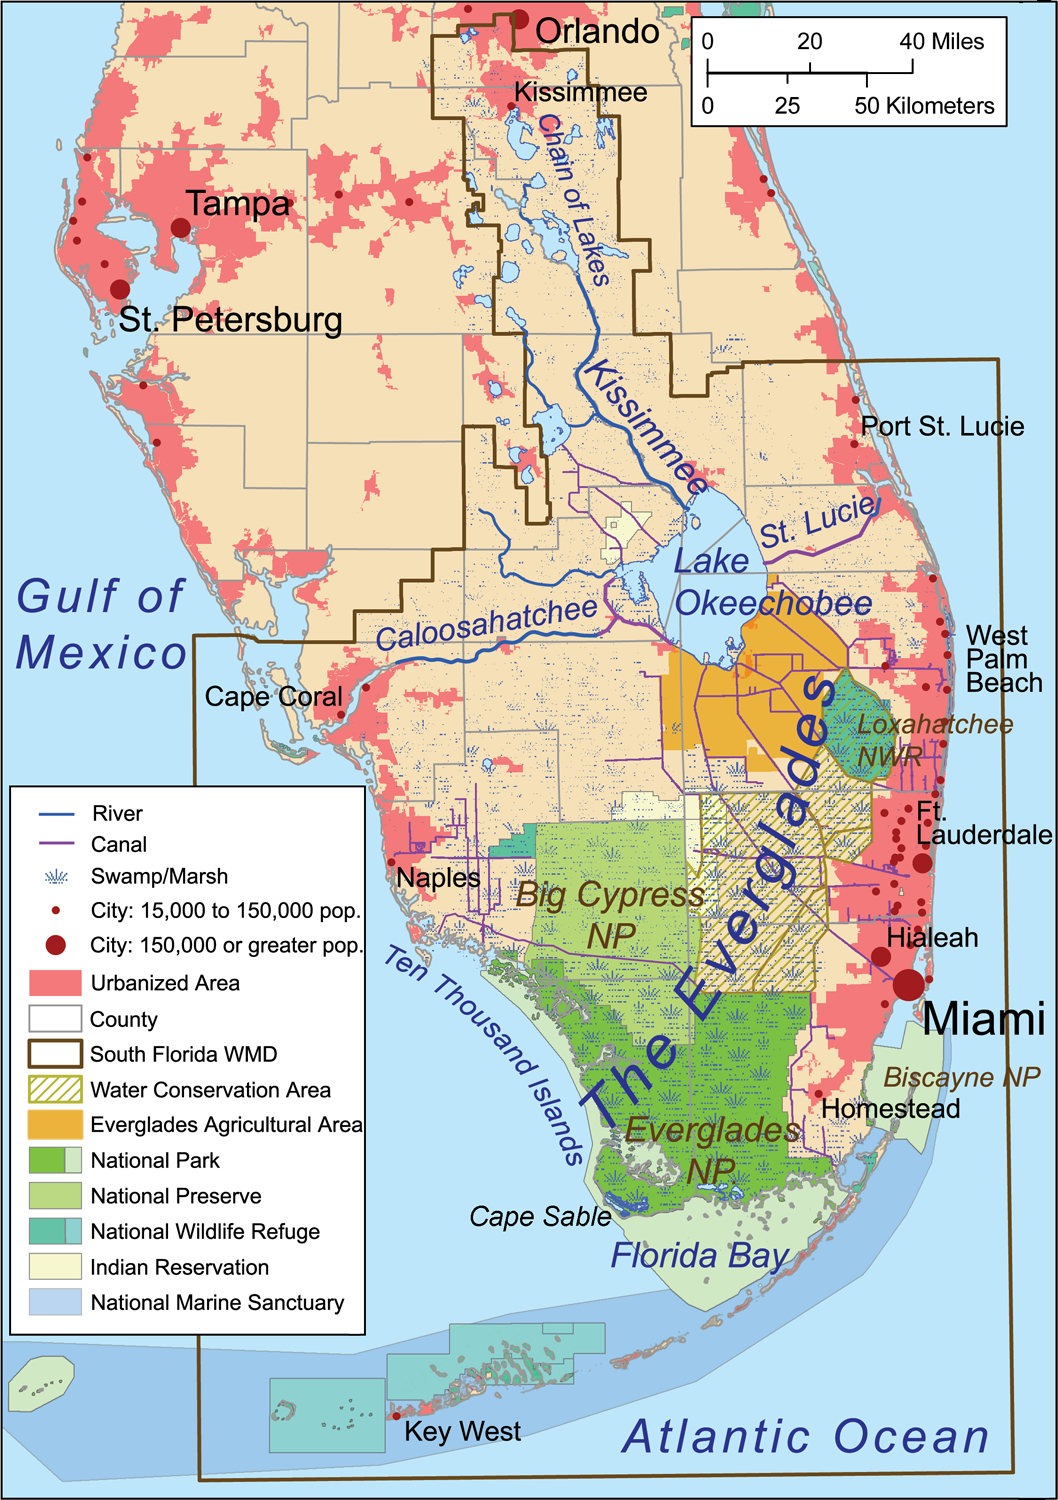 Digital Preliminary Flood Maps For St. Lucie County Ready - Treasure - Flood Zone Map Port St Lucie Florida